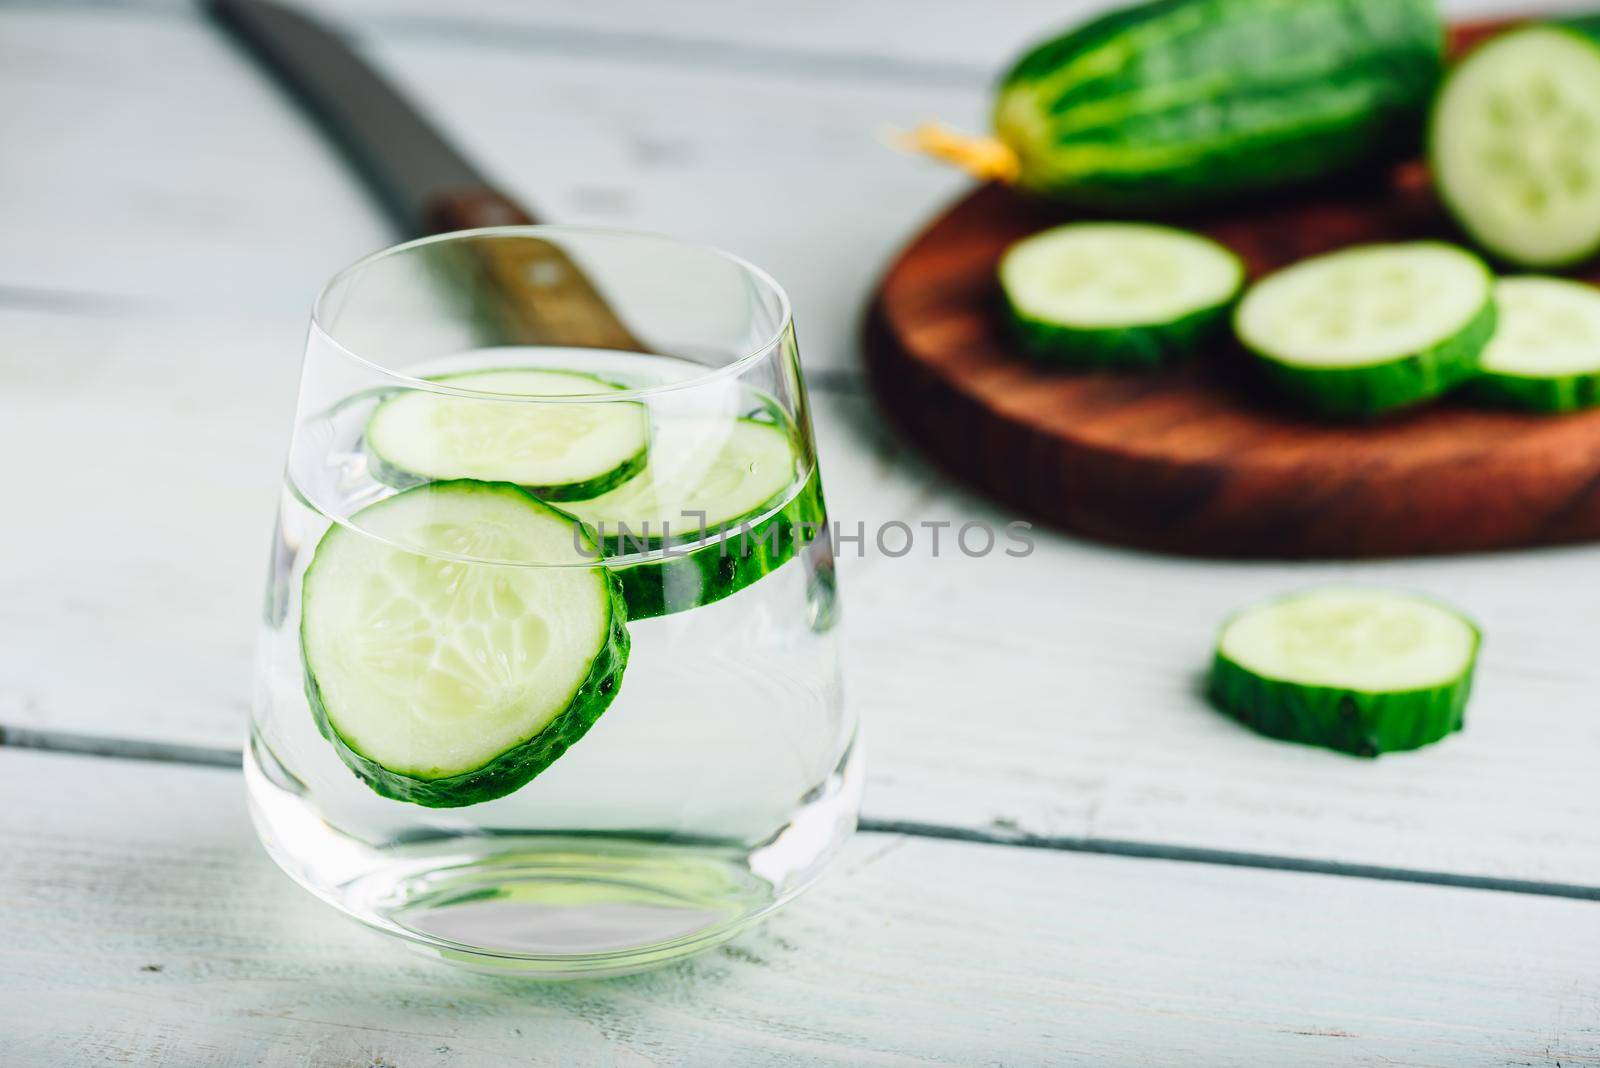 Infused water with sliced cucumber by Seva_blsv